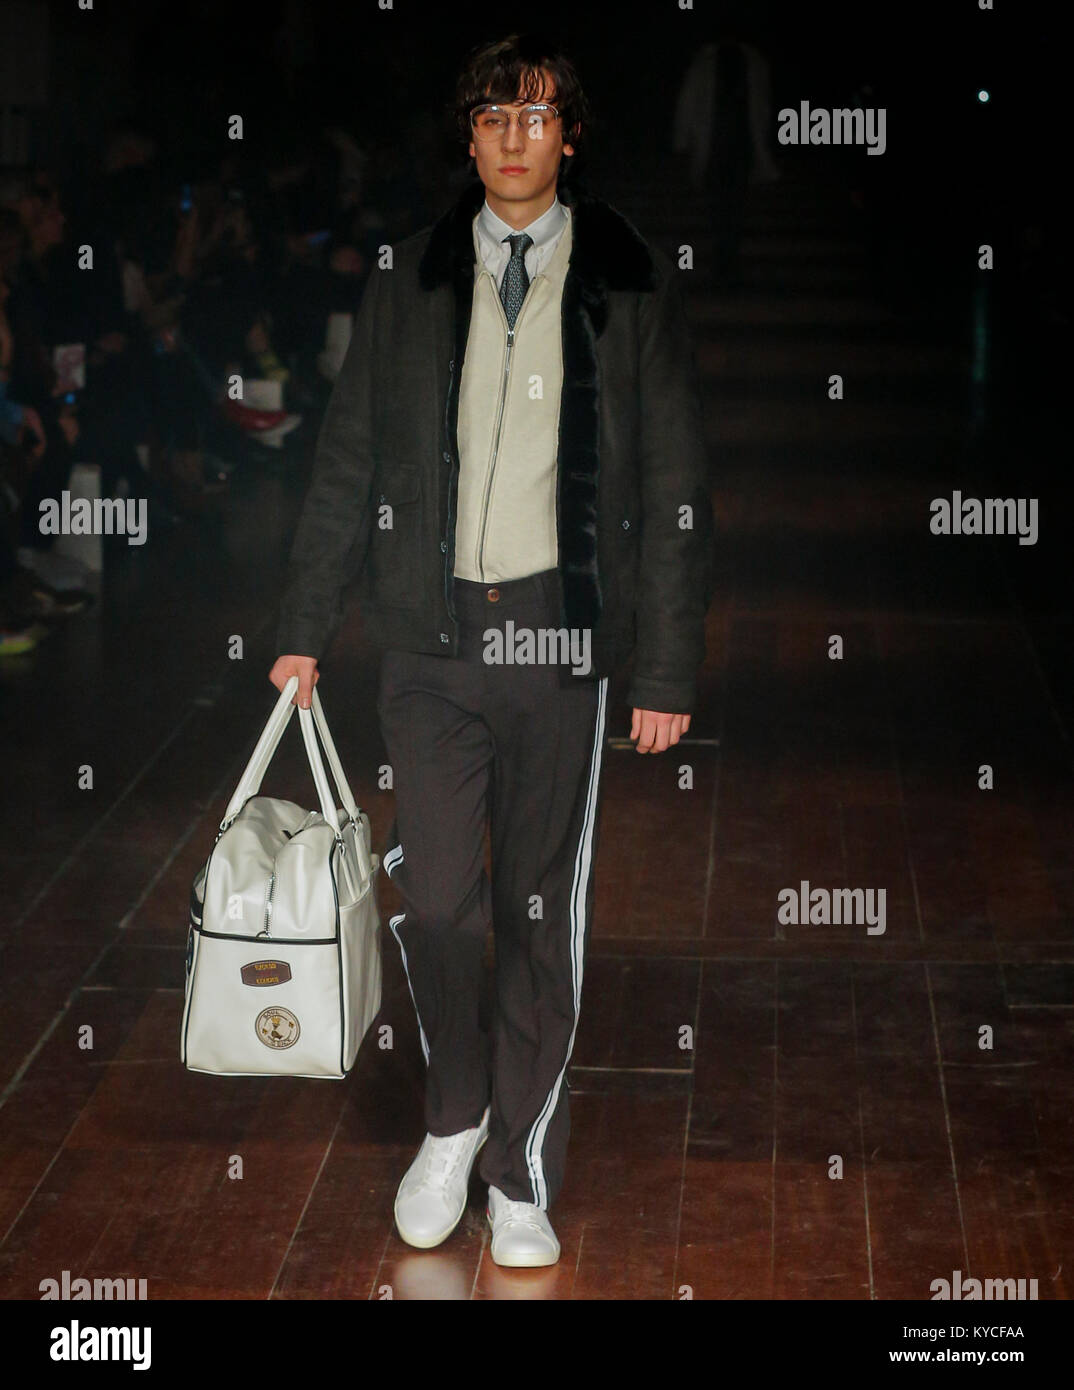 British fashion brand Ben Sherman presenting new collection at London Fashion Week Mens AW18 catwalk with Henry Holland Stock Photo